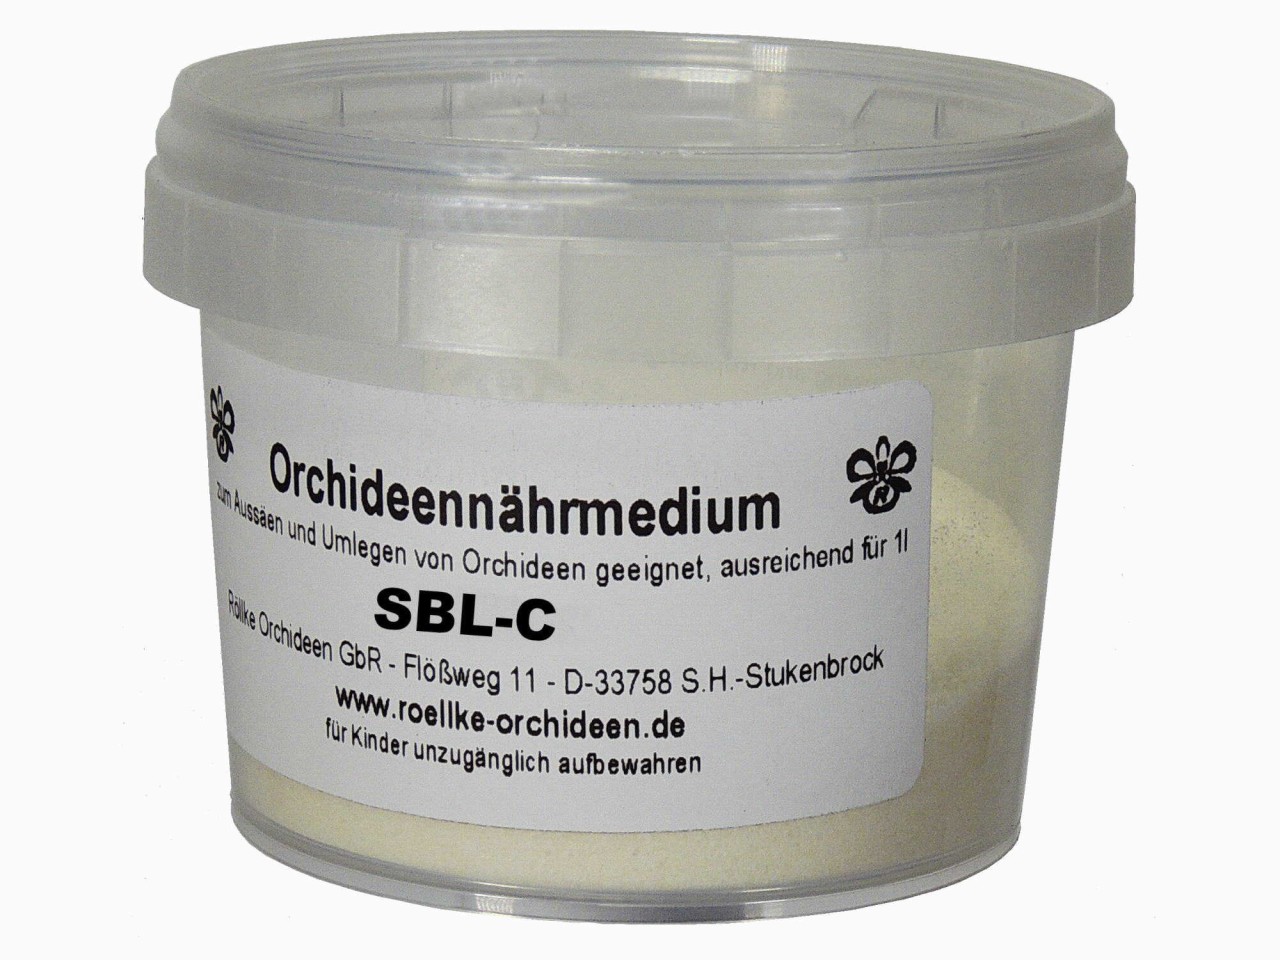 seed sowing and replating medium SBL-C